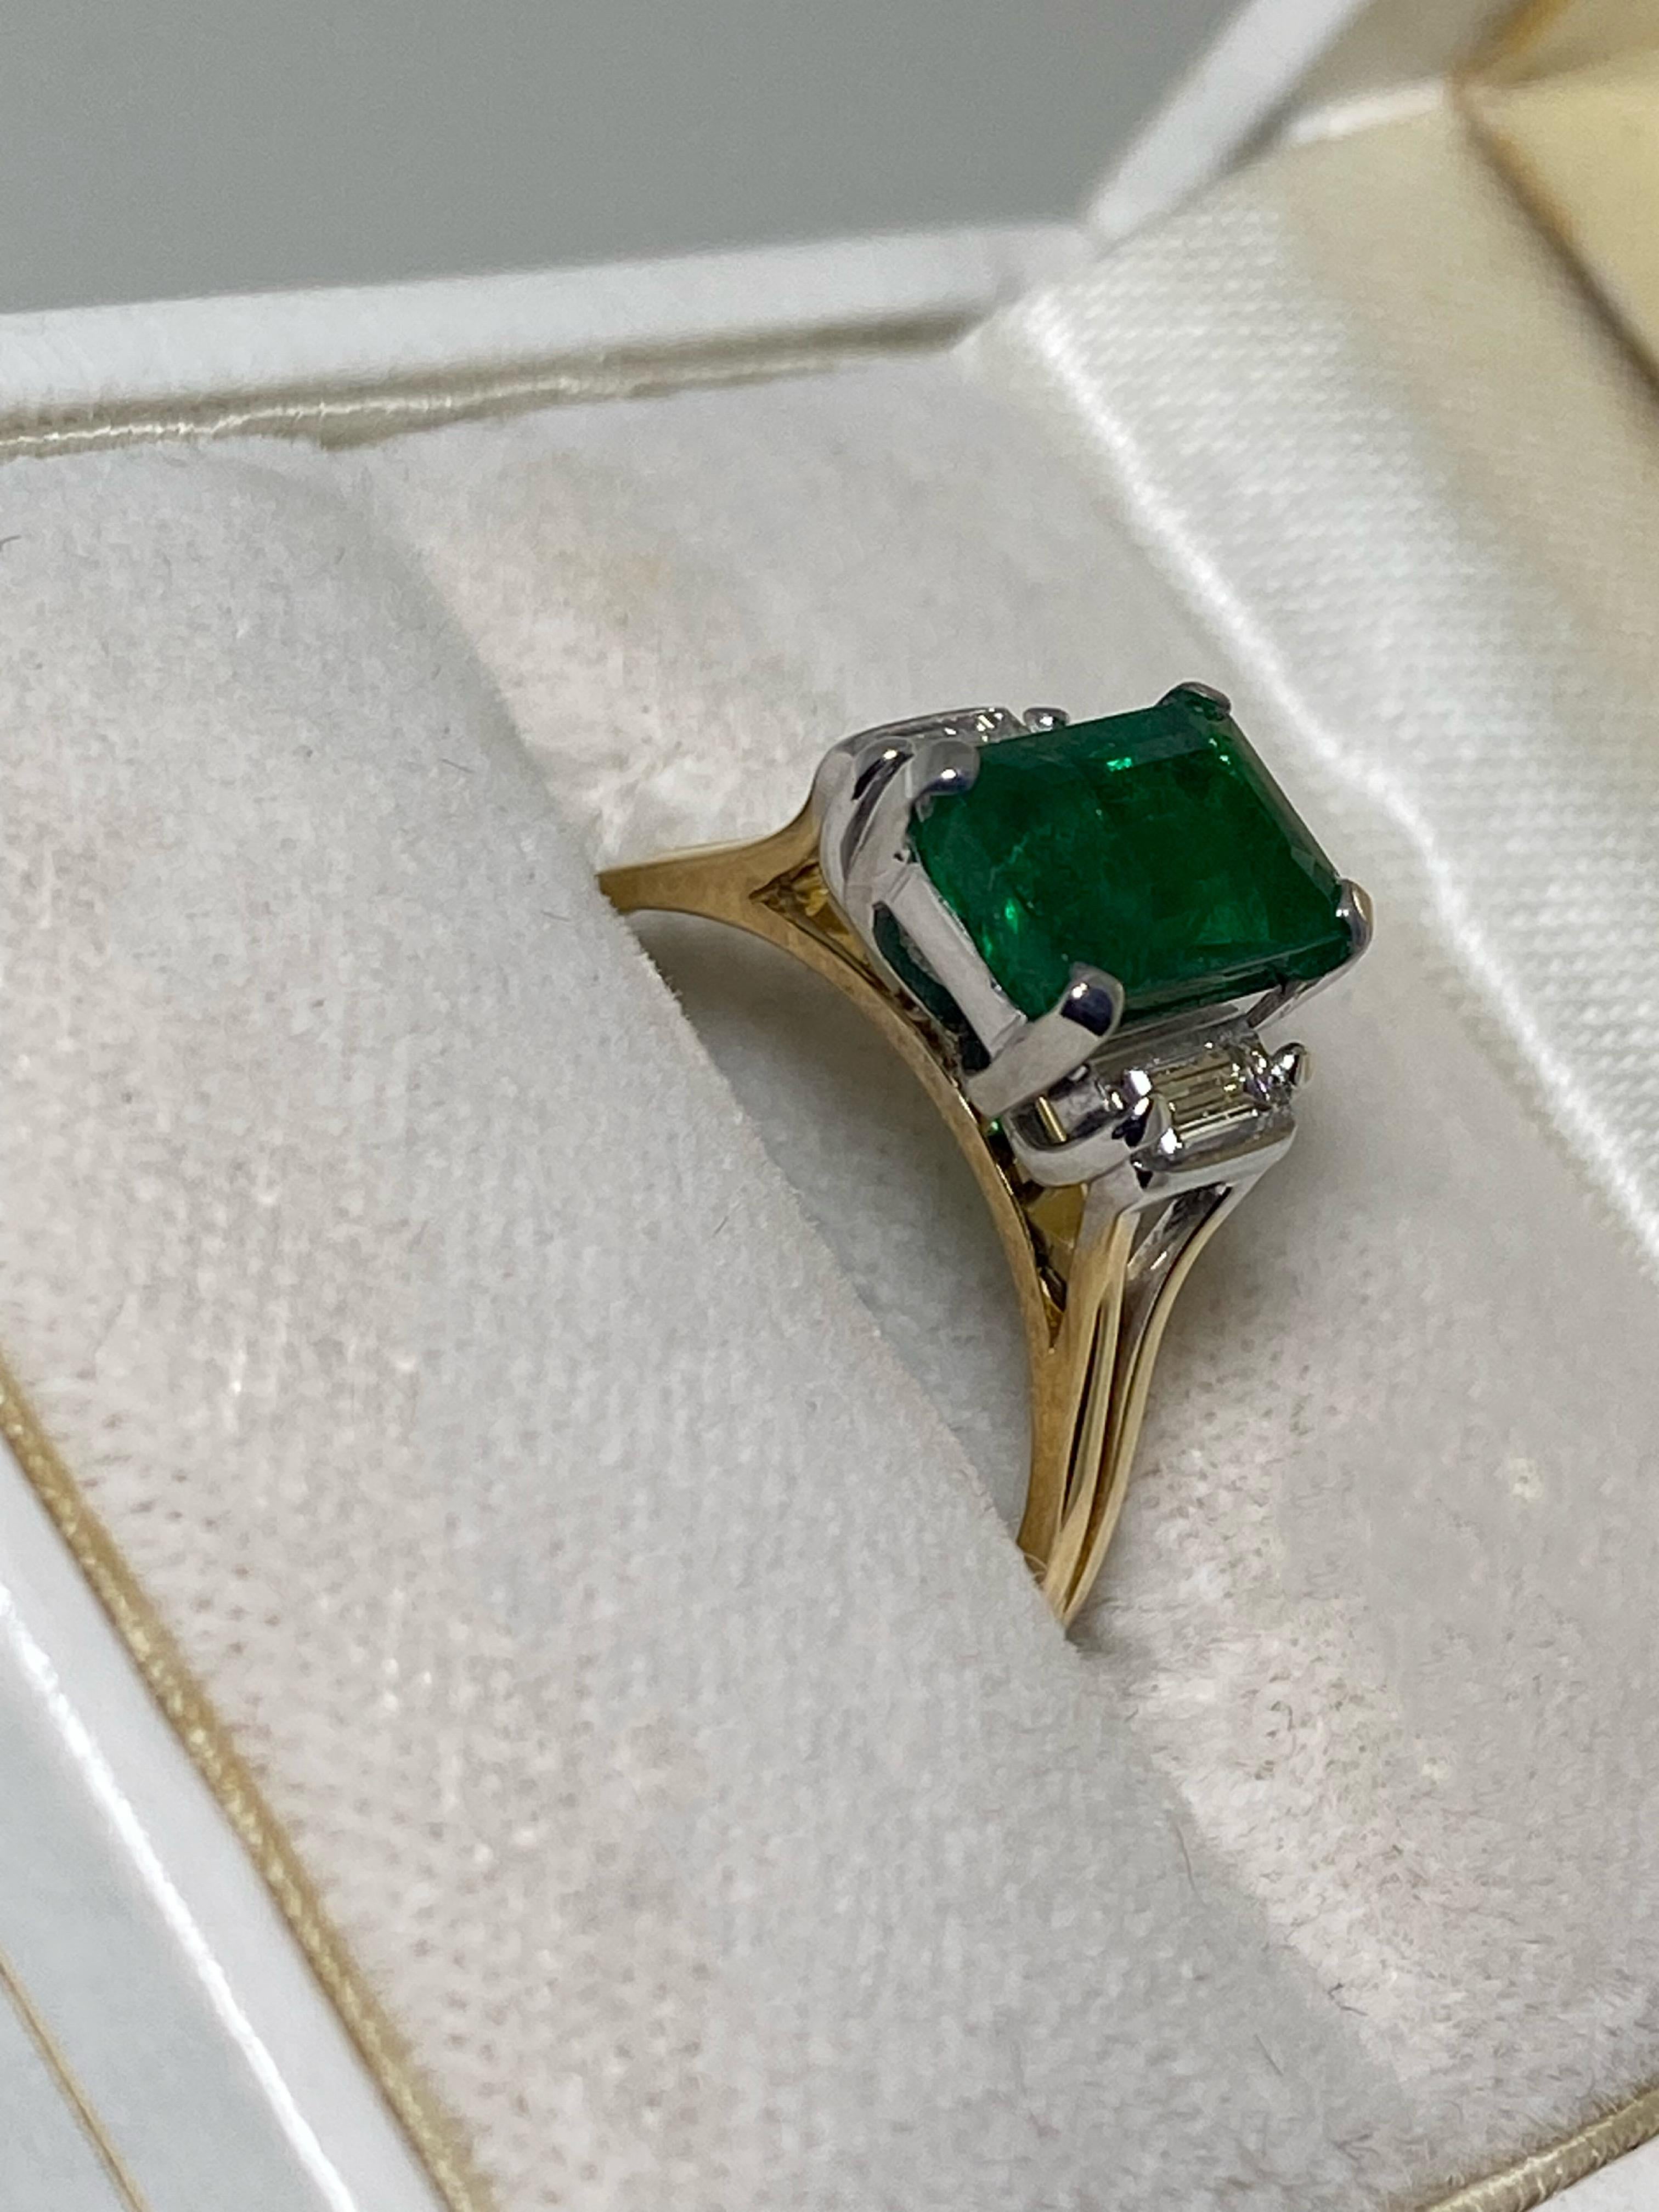 Women's 1.46ct Natural Colombian Emerald & Diamond (0.20ct) Ring in 18K Gold & Platinum. For Sale